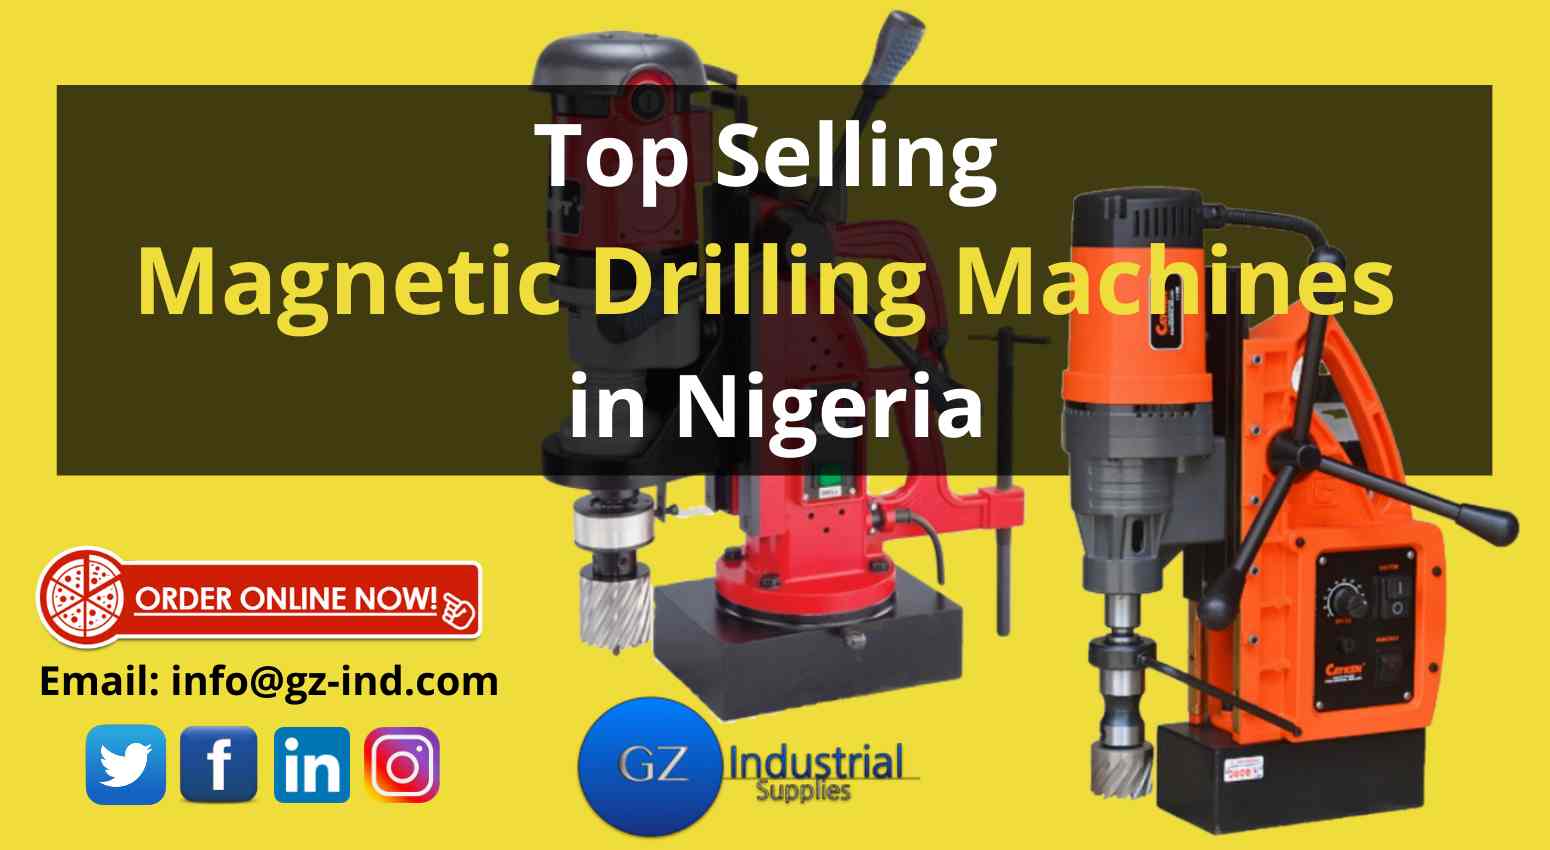 Top Selling Magnetic Drilling Machines in Nigeria